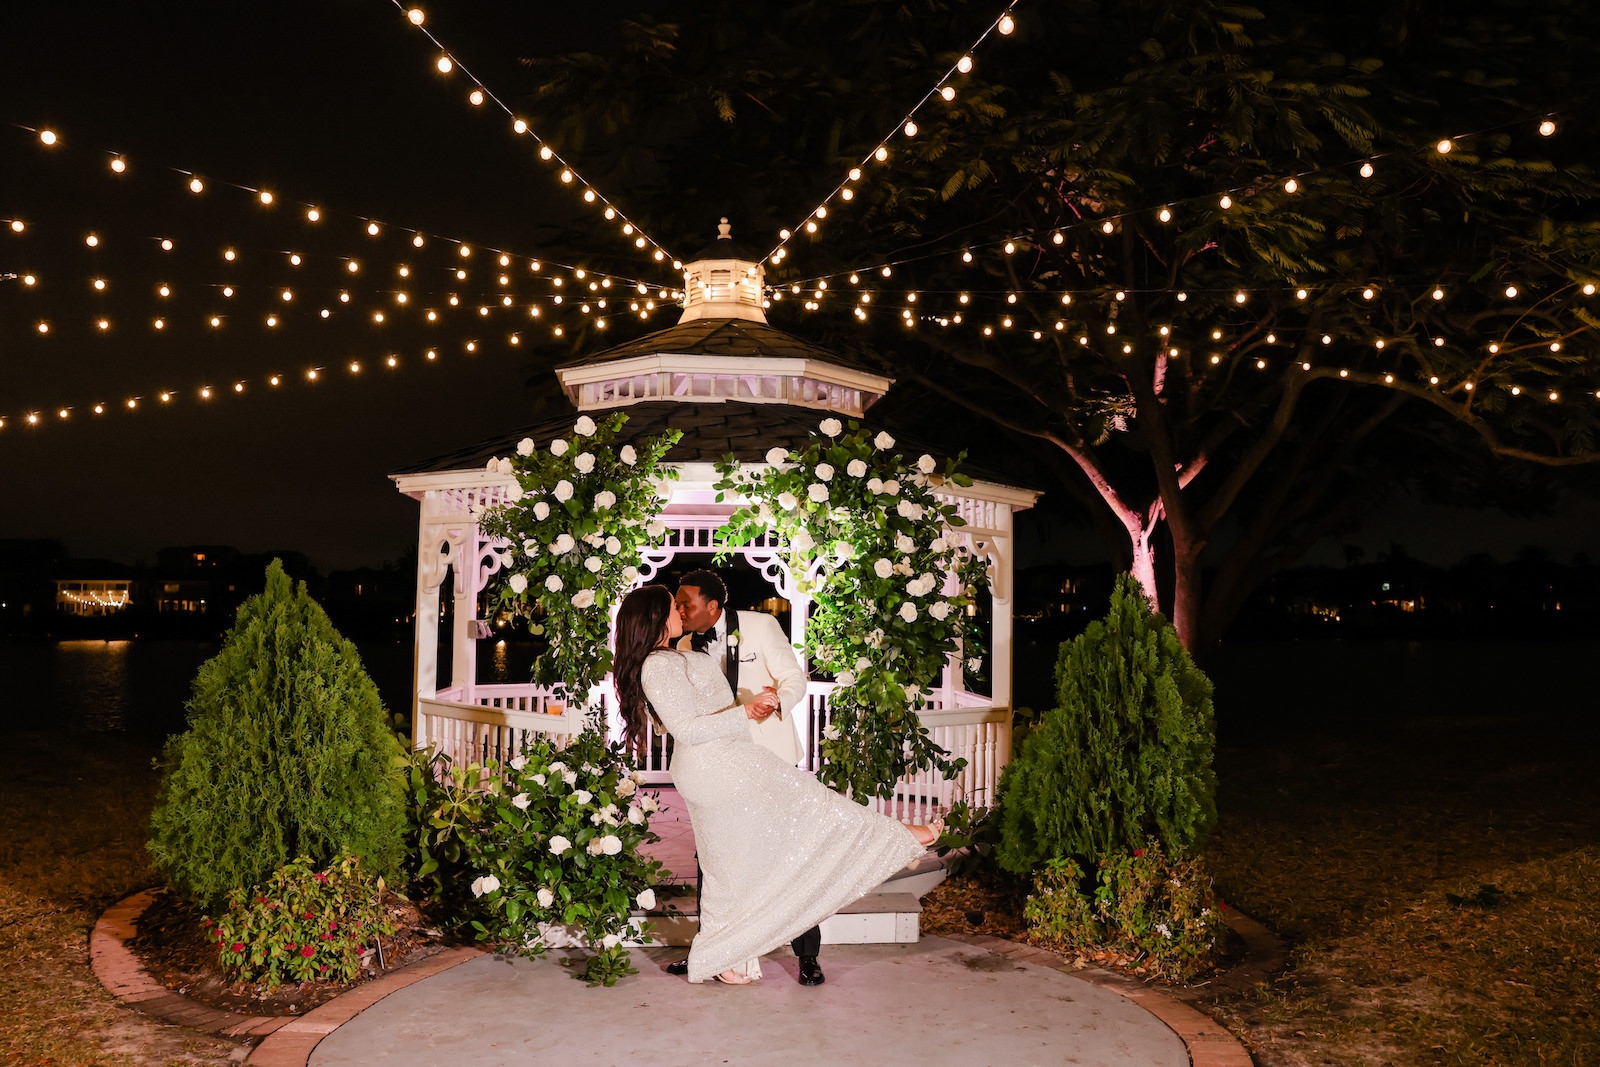 Modern Romantic Glam Wedding, Bride and Groom Kissing Under String Lights by Waterfront Gazebo with Greenery and White Roses Arch Night Portrait | Tampa Bay Wedding Photographer Lifelong Photography Studio | Wedding Venue Davis Islands Garden Club